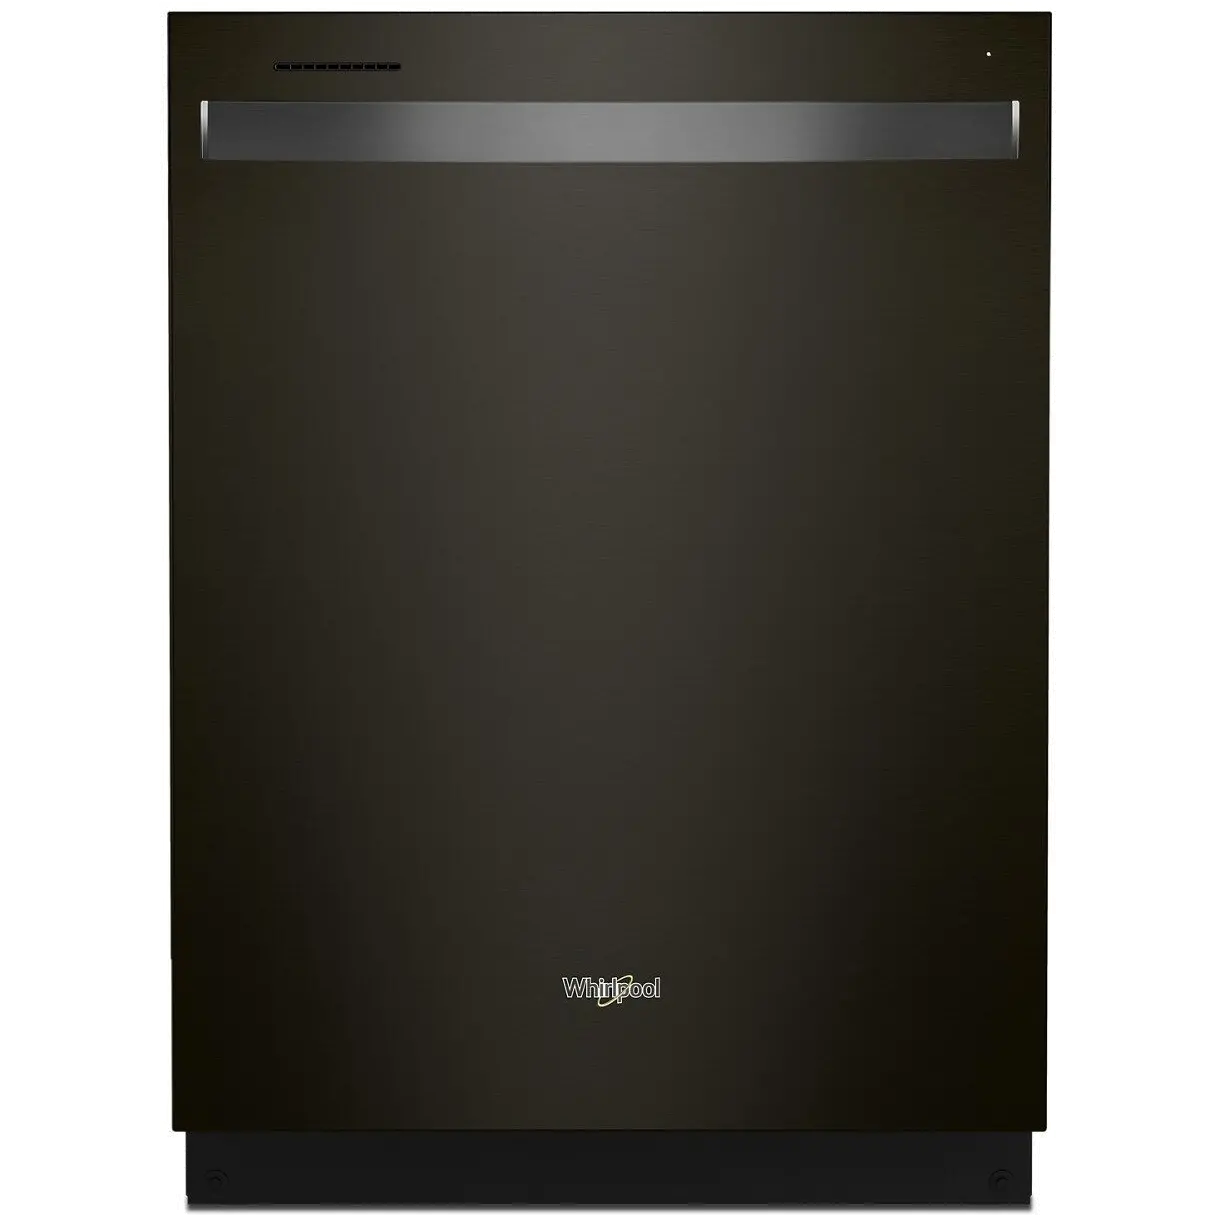 WDT750SAKV Whirlpool Top Control Dishwasher - Black Stainless Steel-1